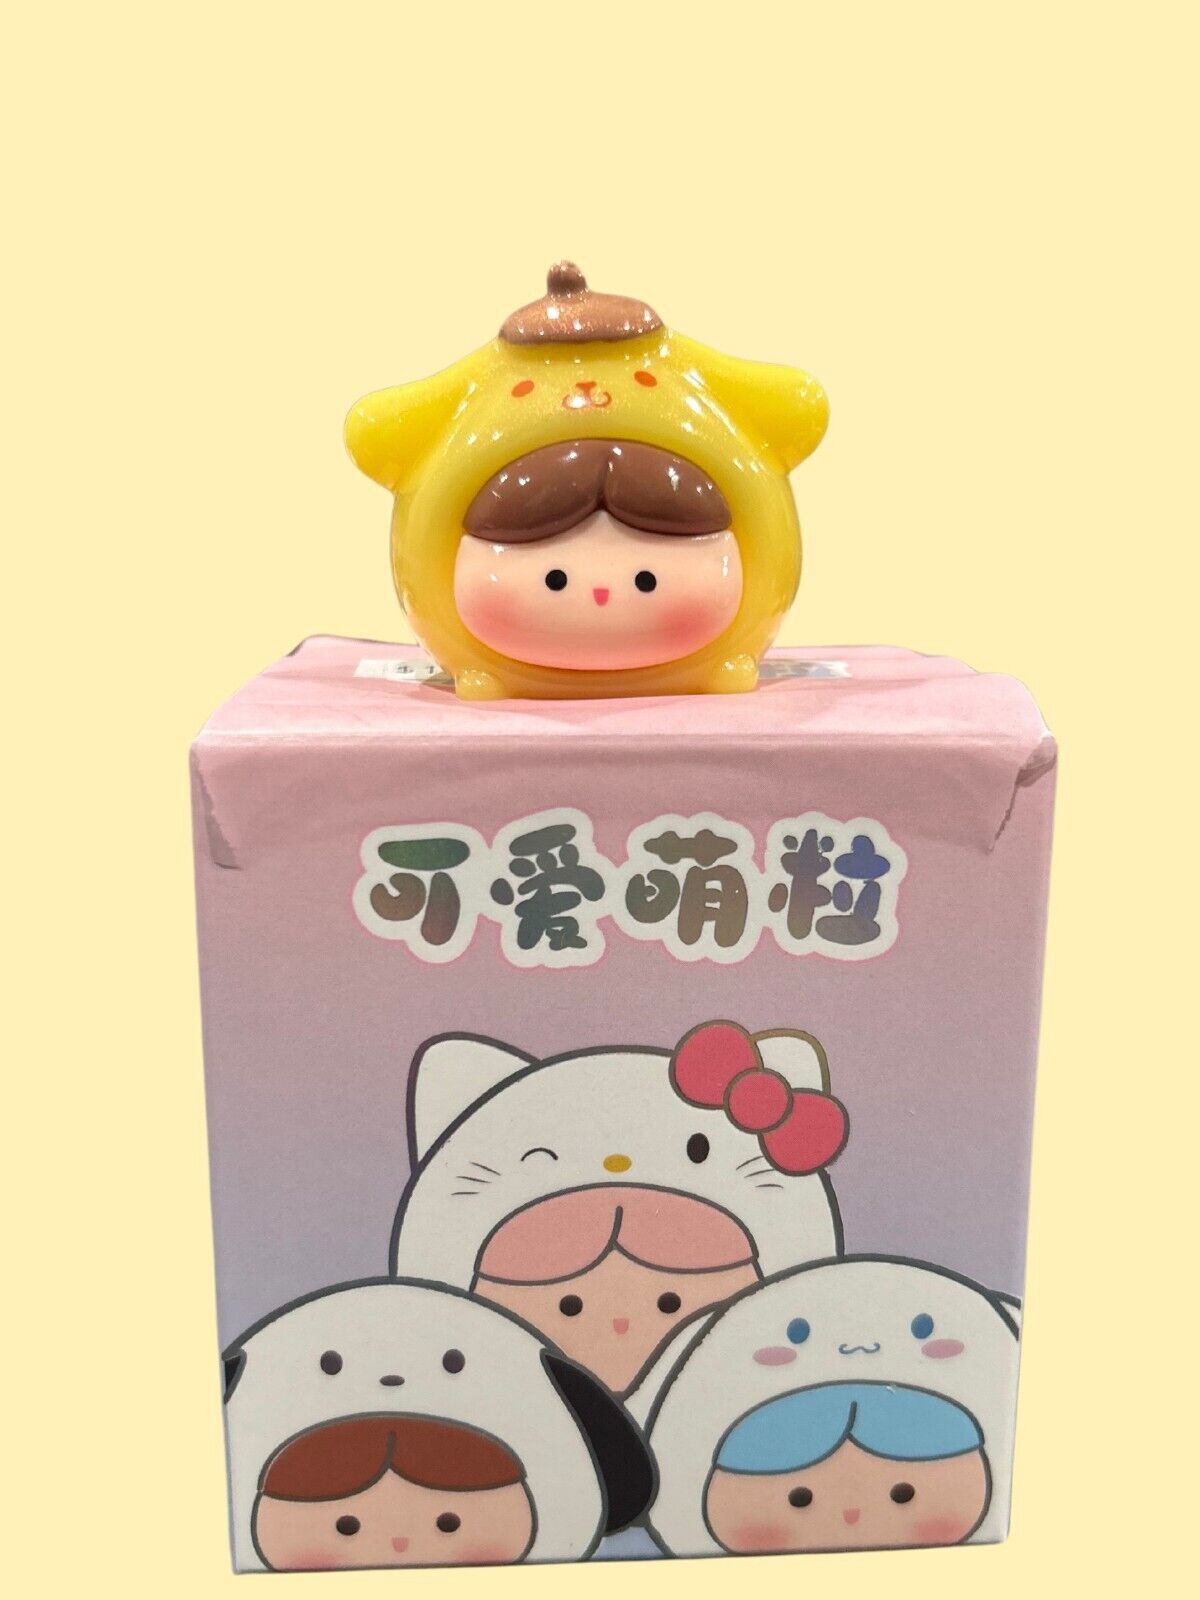 Sanrio blind box confirmed Pom Pom Purin (includes character card)